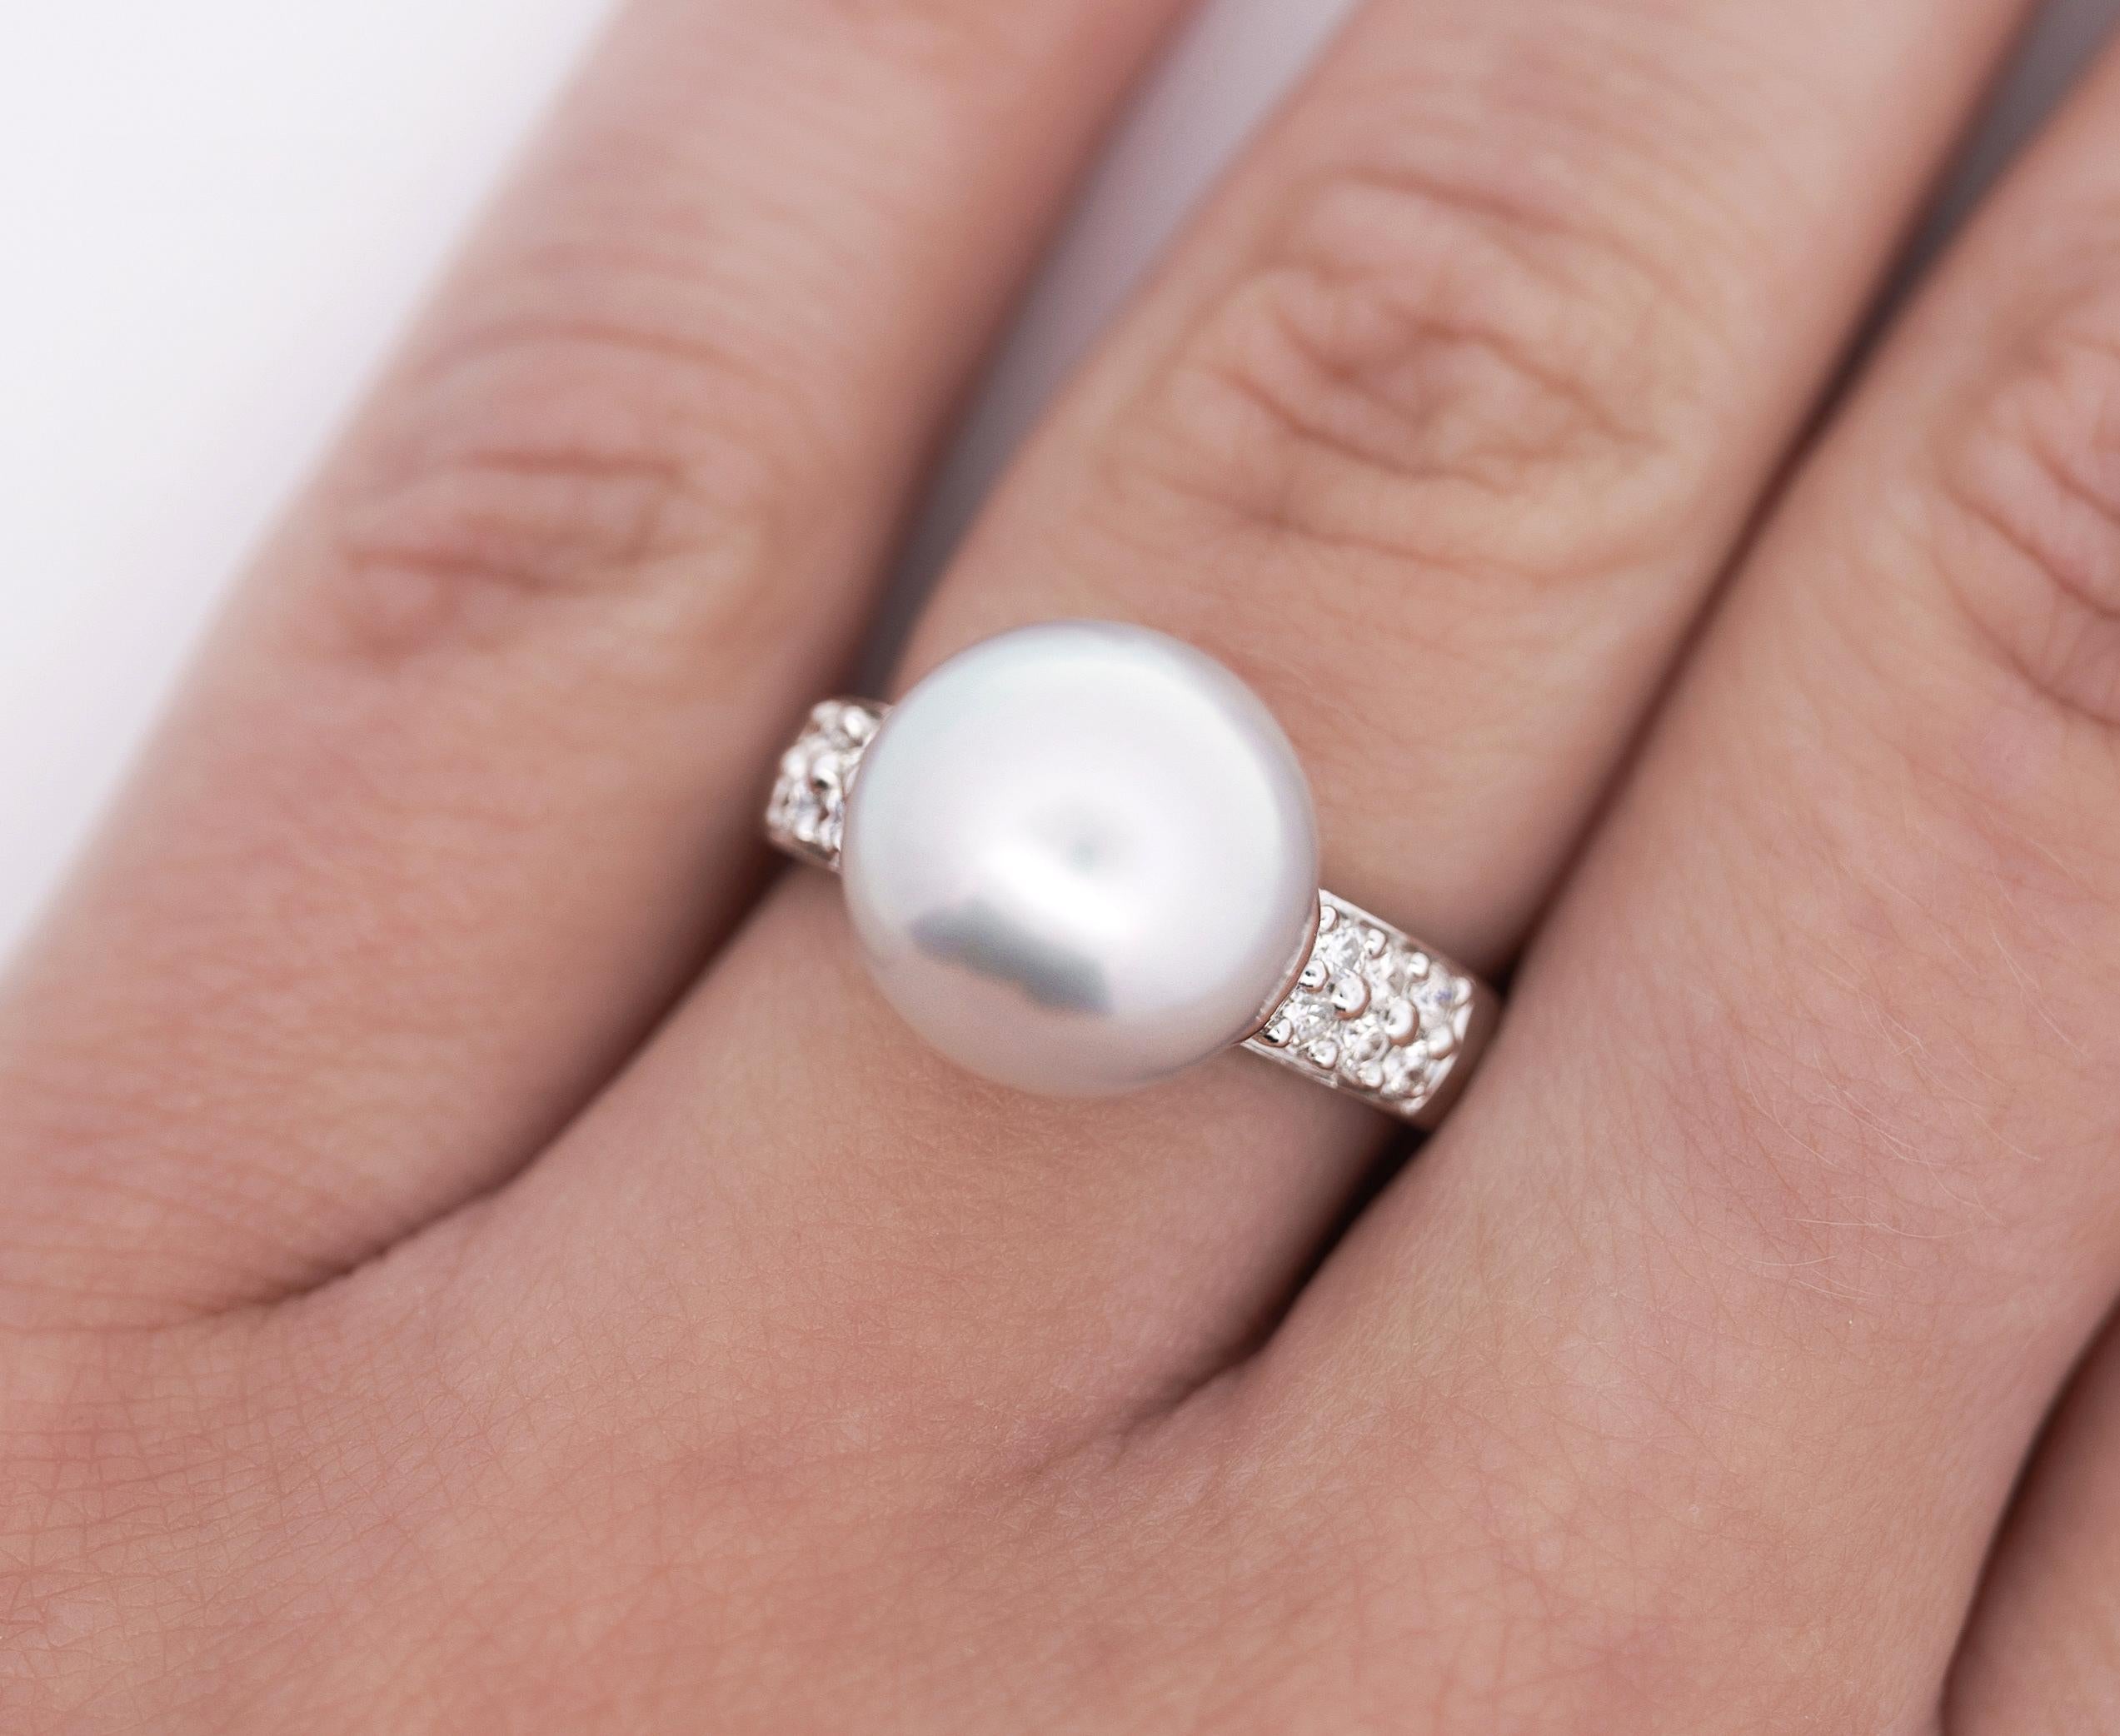 12mm Cultured South Sea Pearl & Round Diamond Ring in Platinum